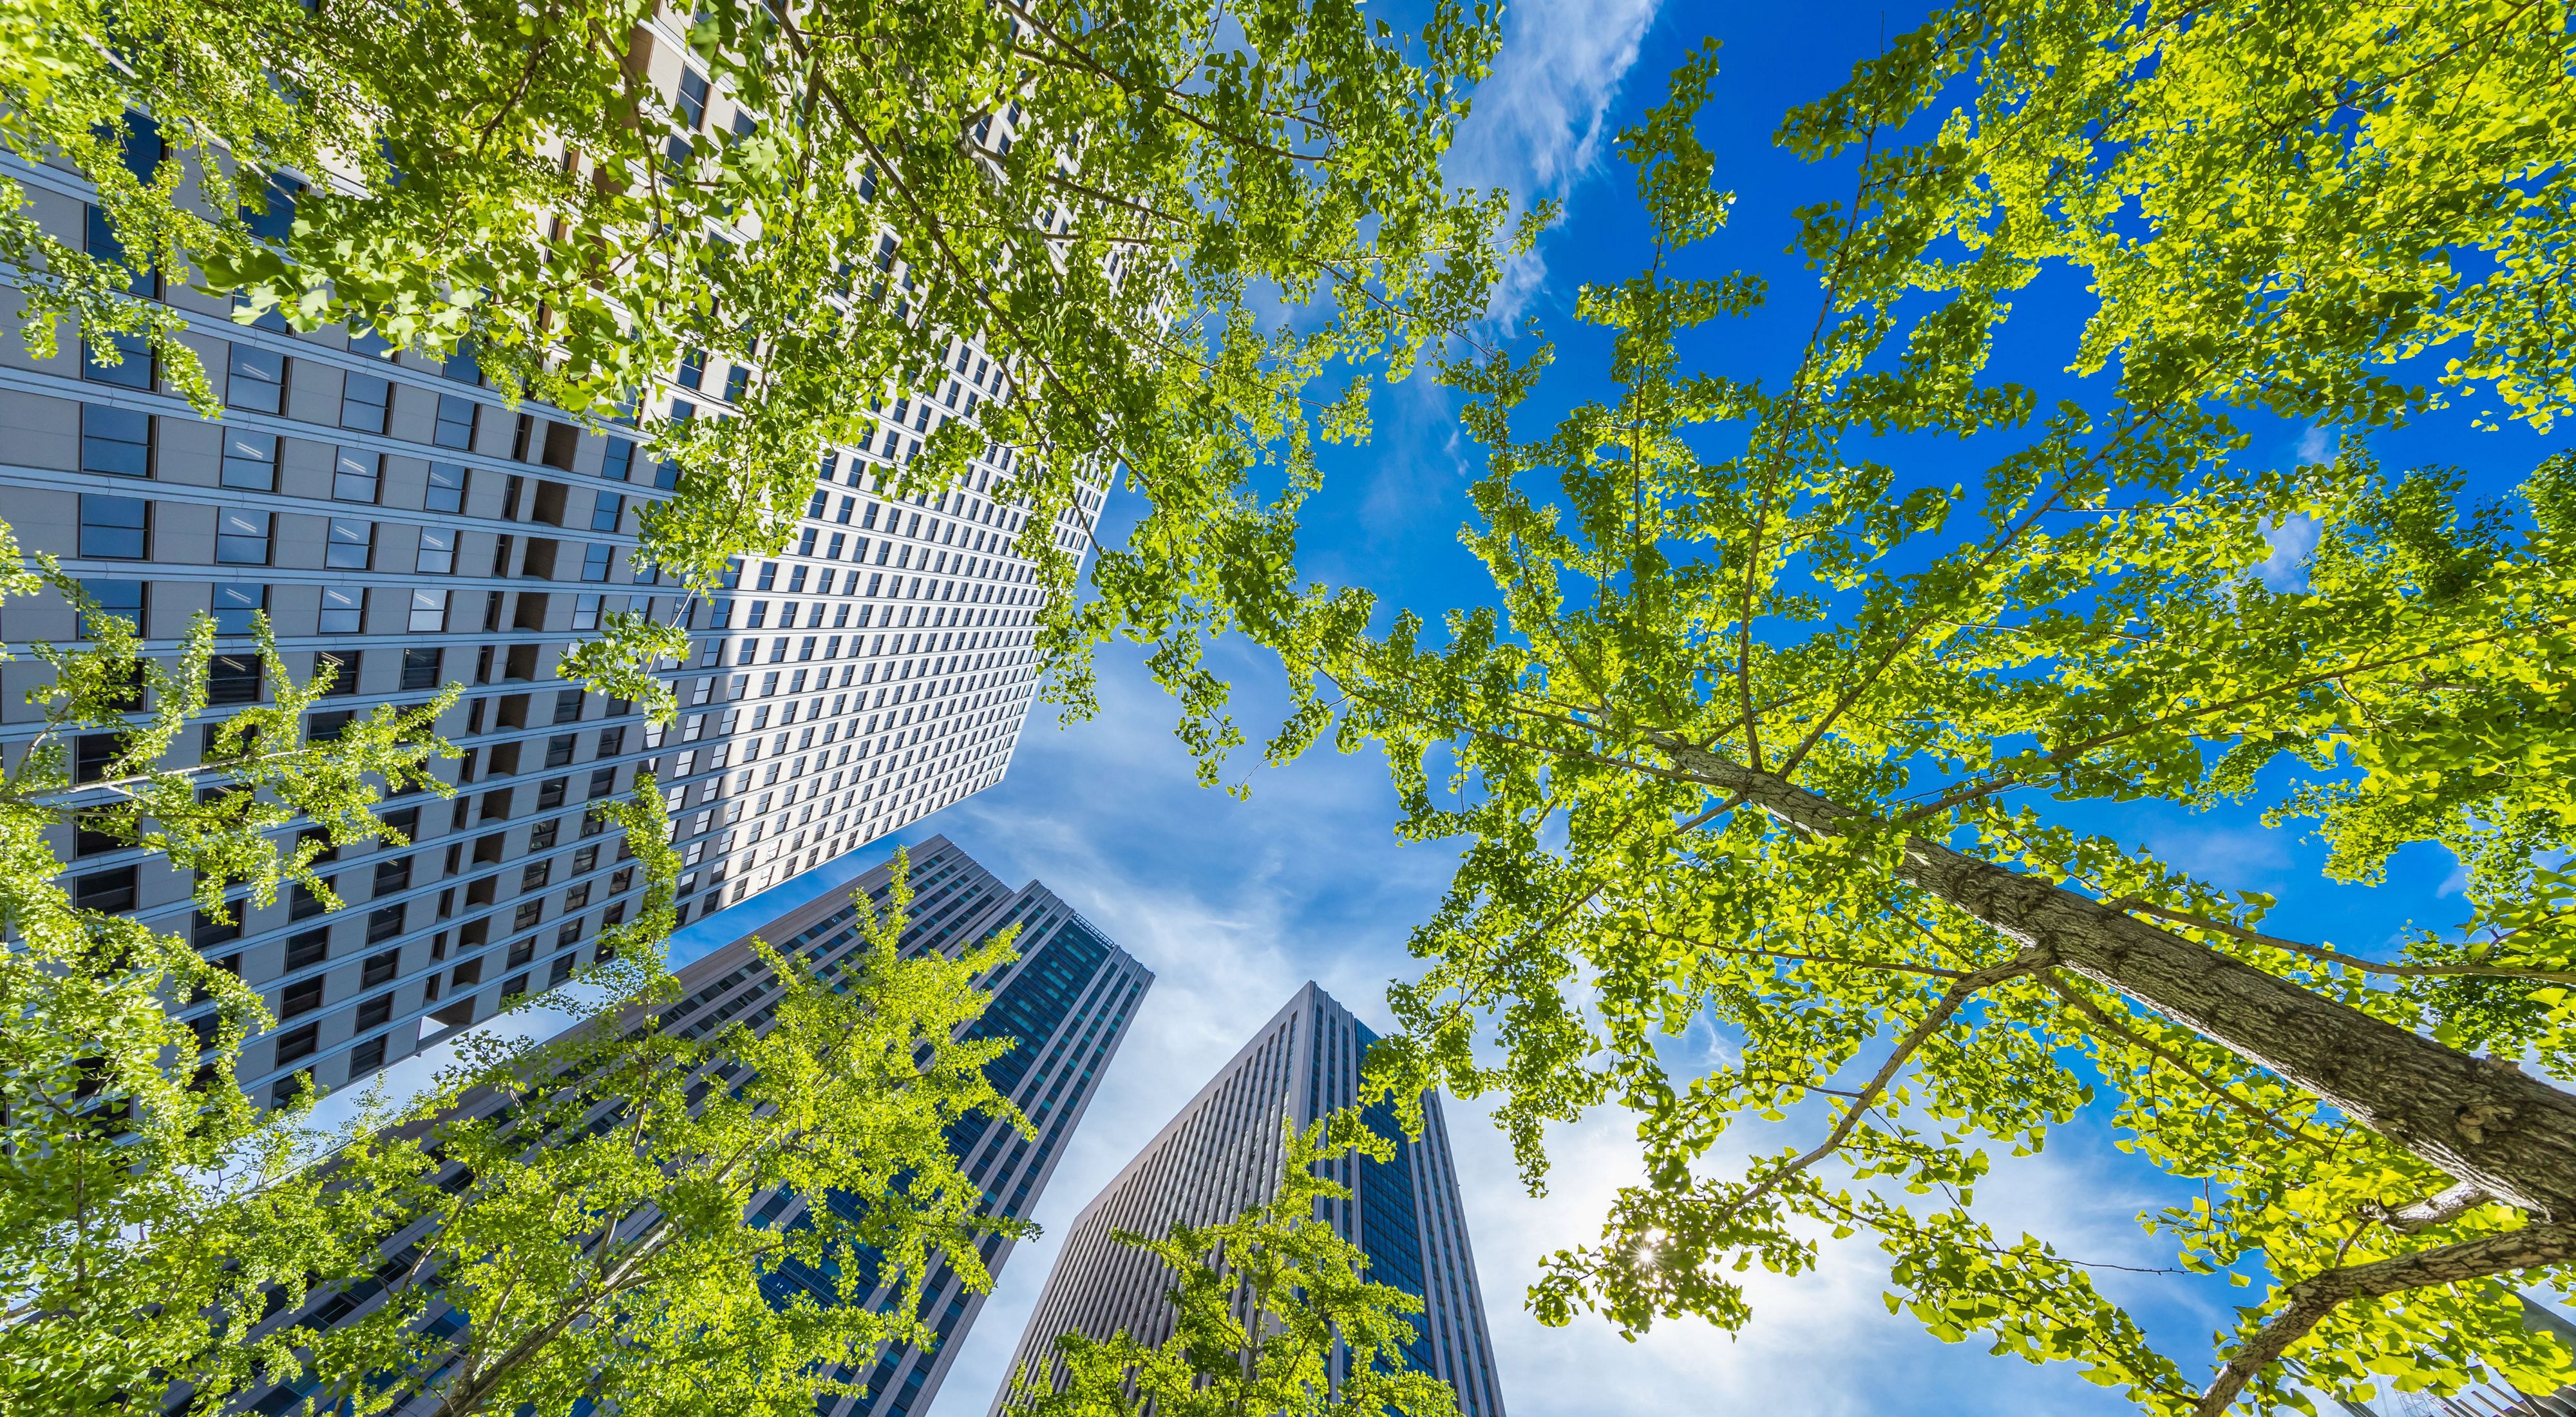 a view of trees over tall skyscrapers.